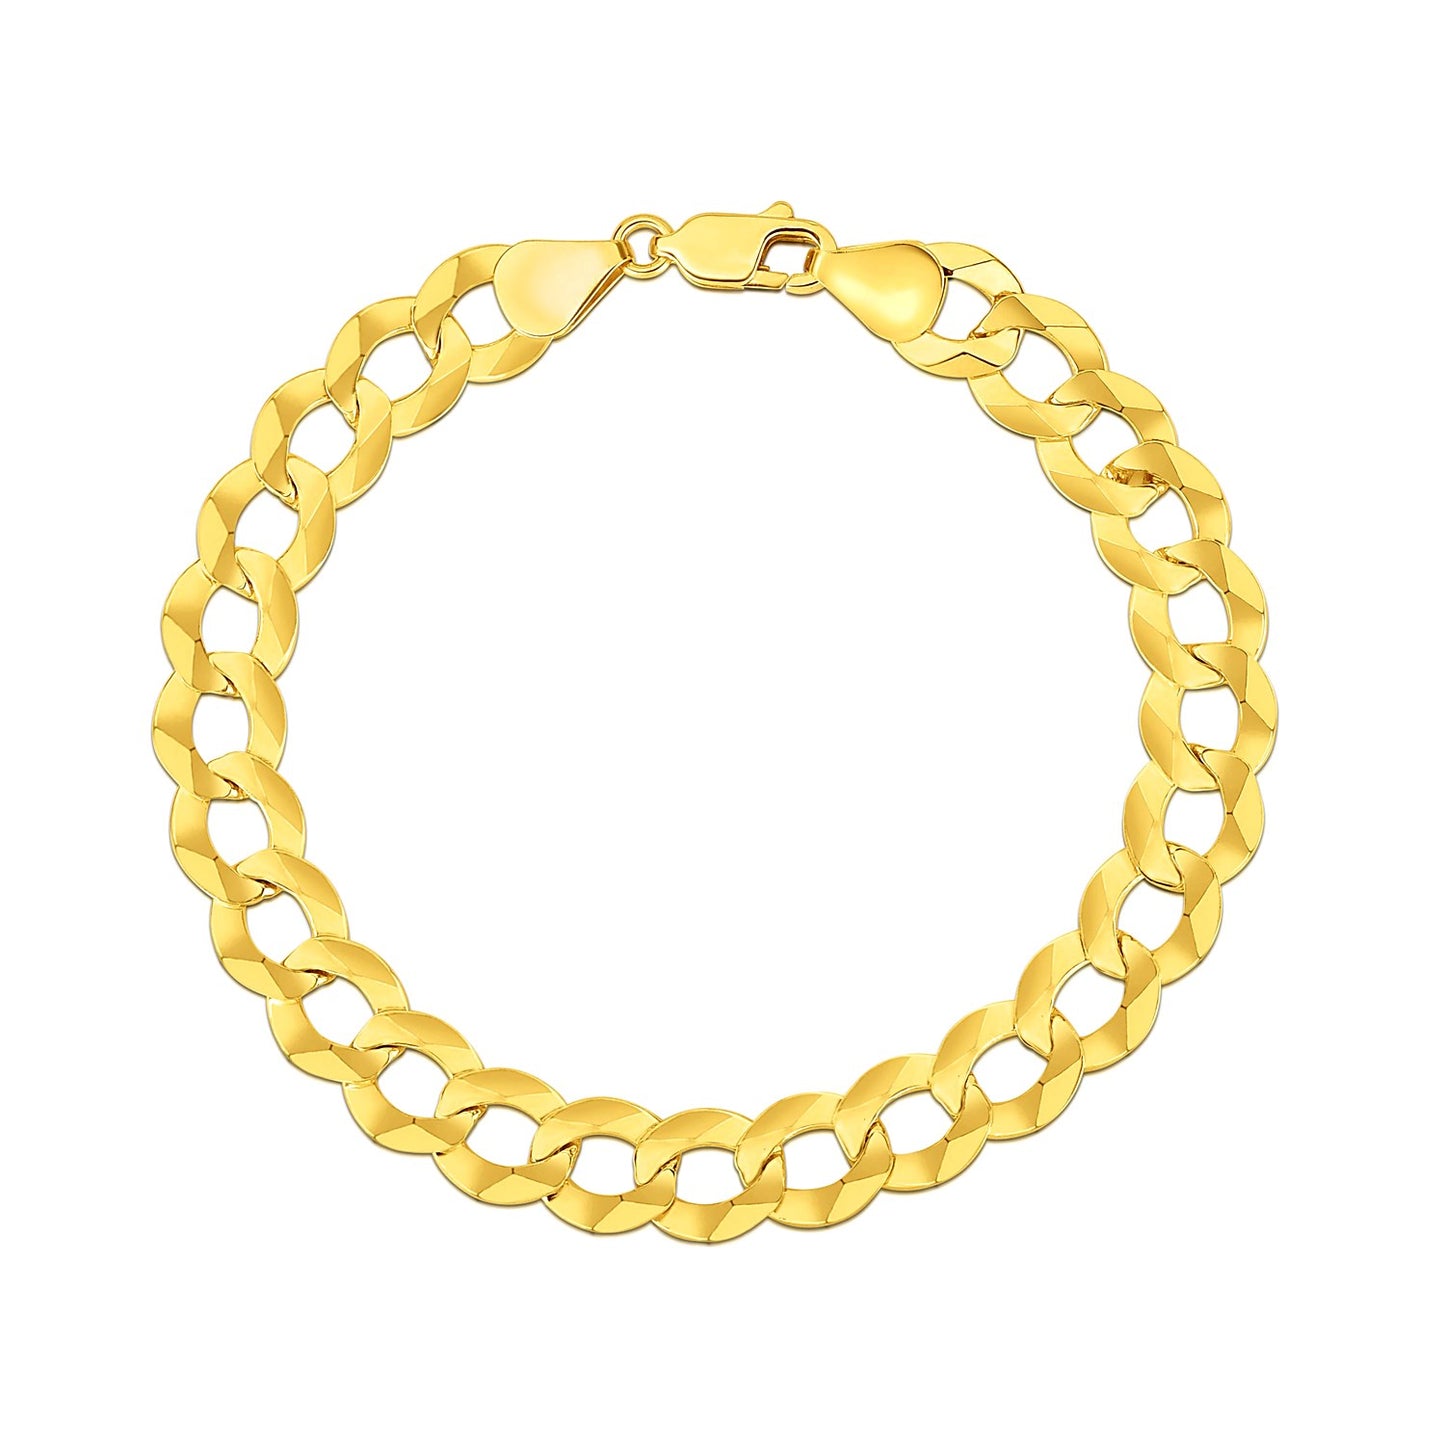 14k Yellow Gold Solid Curb Bracelet 10.0mm